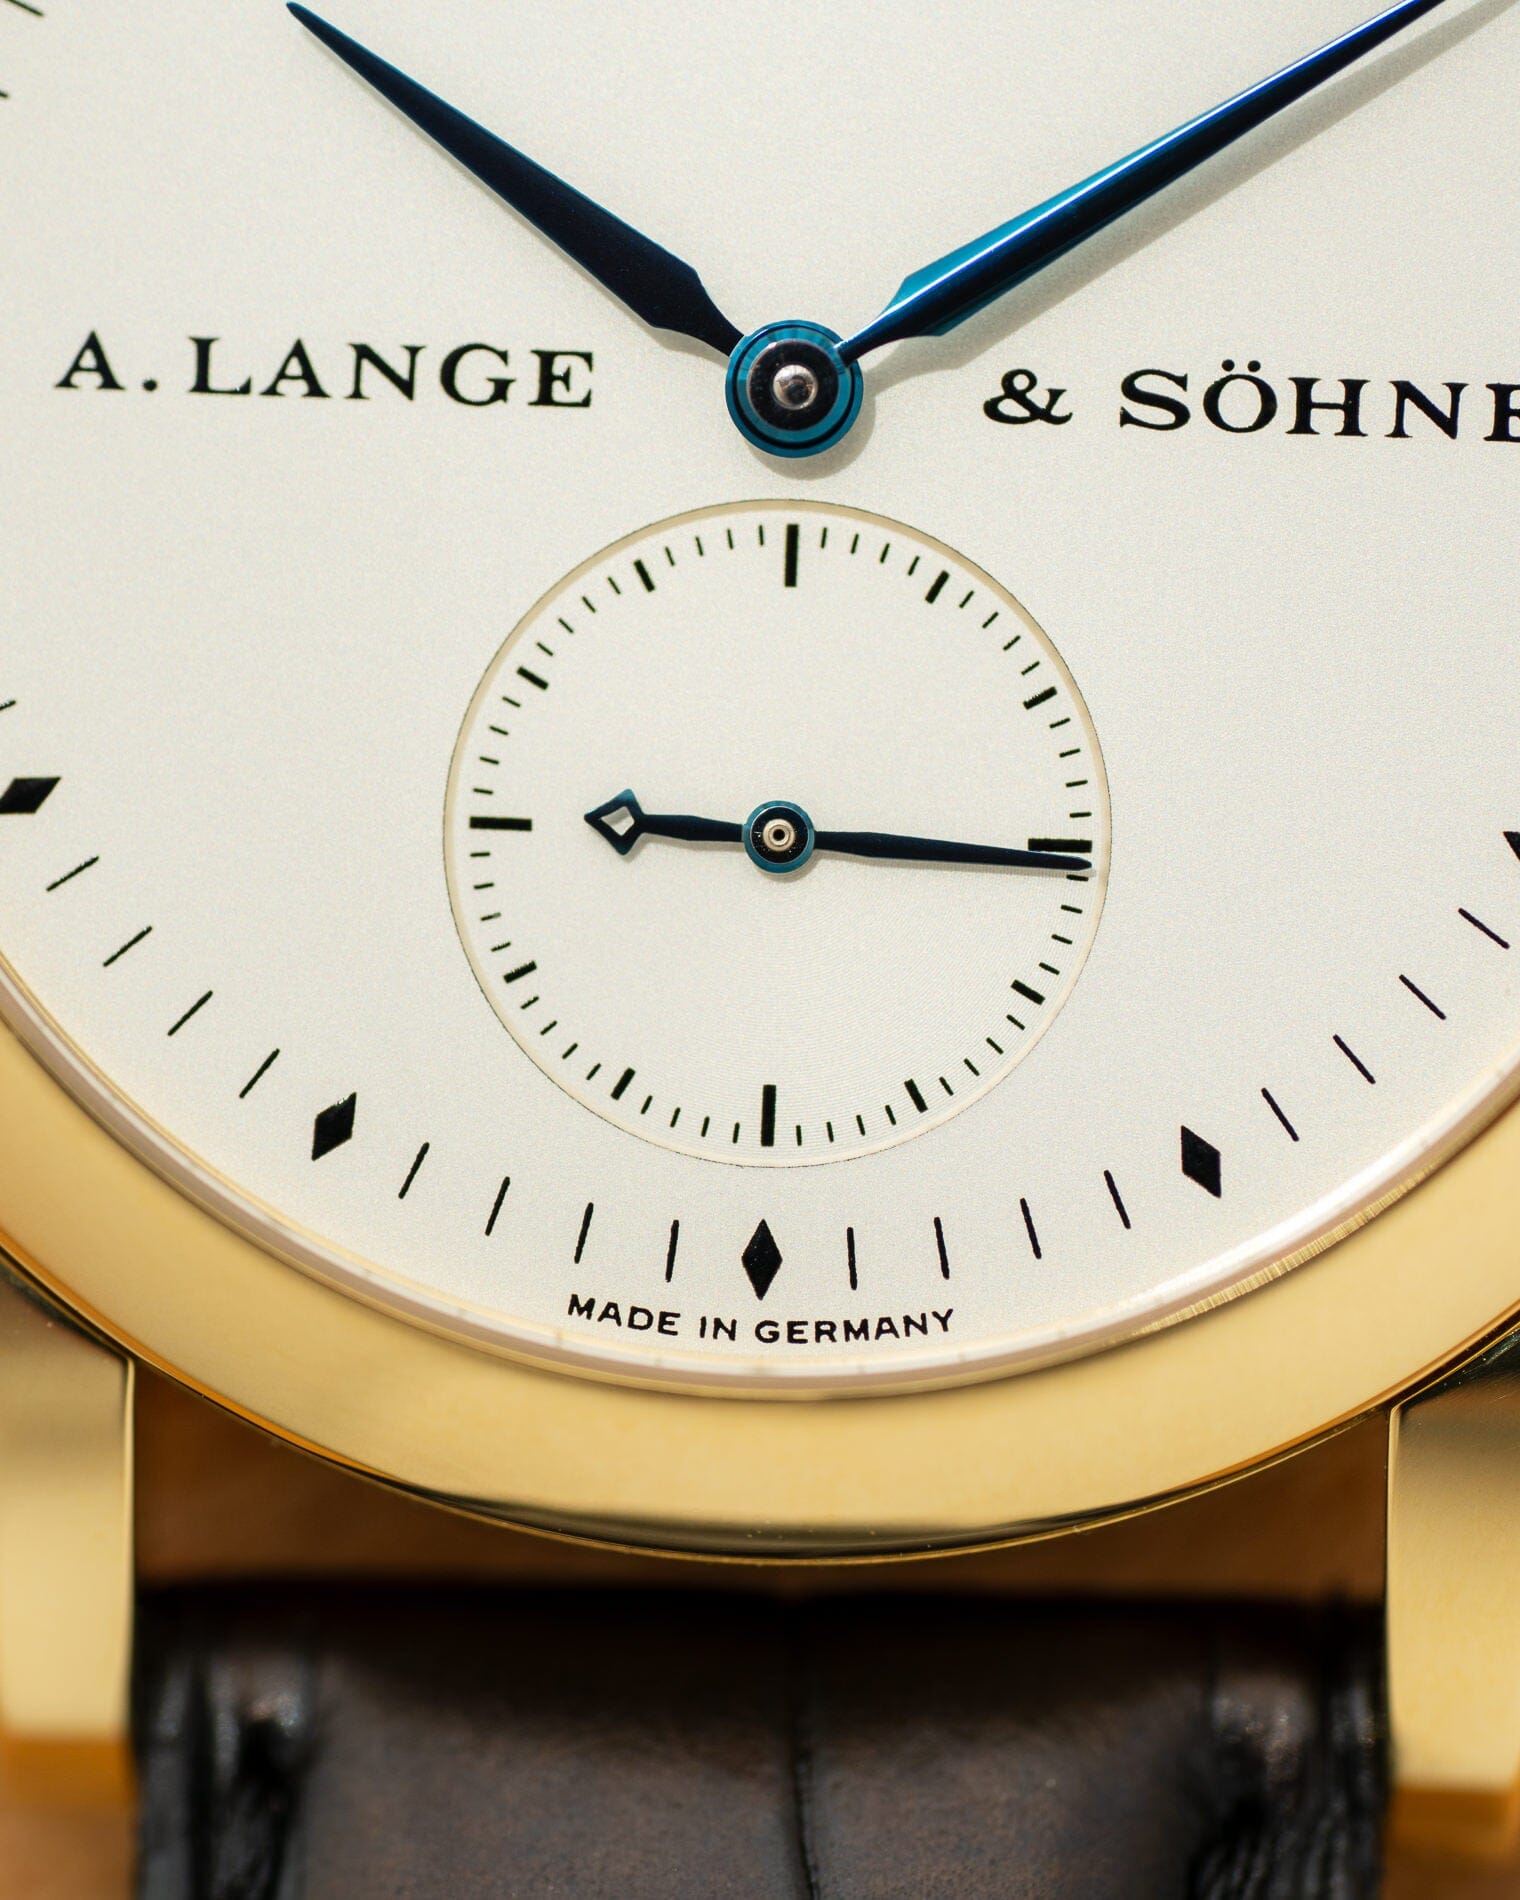 A. Lange & Söhne サクソニア 105.022 YG 箱保証書付き Watch A. LANGE & SOHNE 